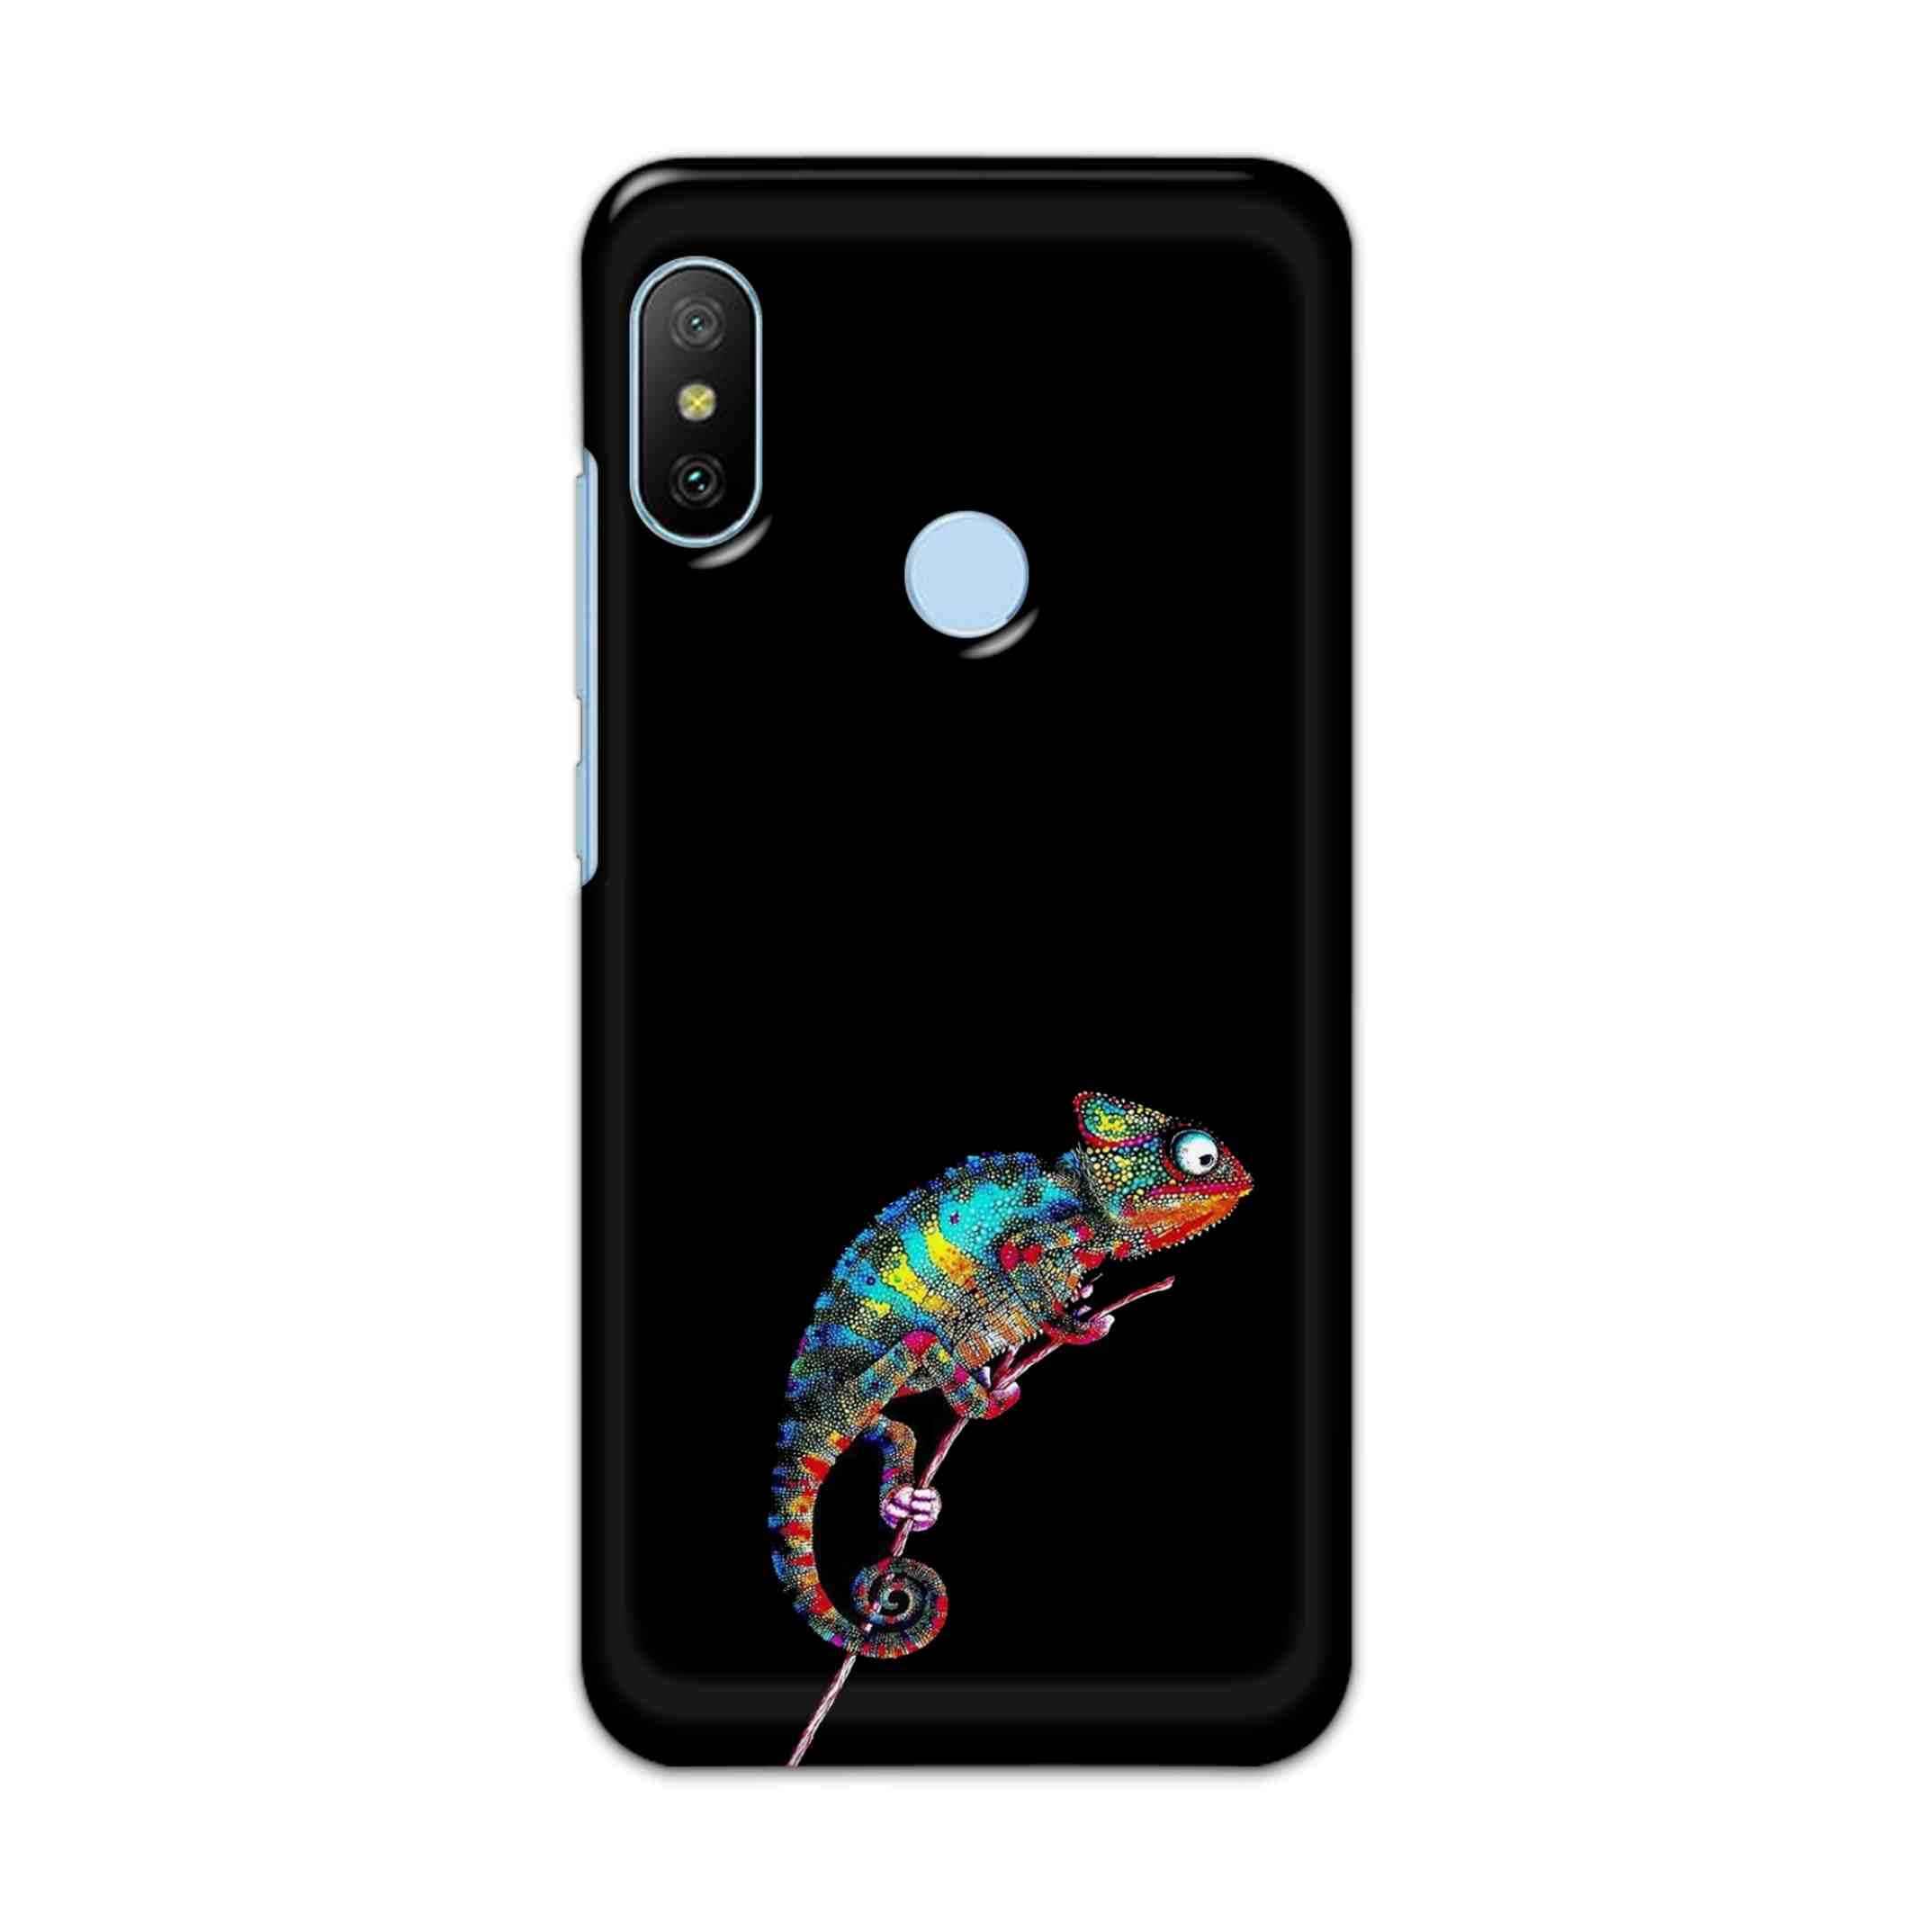 Buy Chamaeleon Hard Back Mobile Phone Case/Cover For Xiaomi Redmi 6 Pro Online